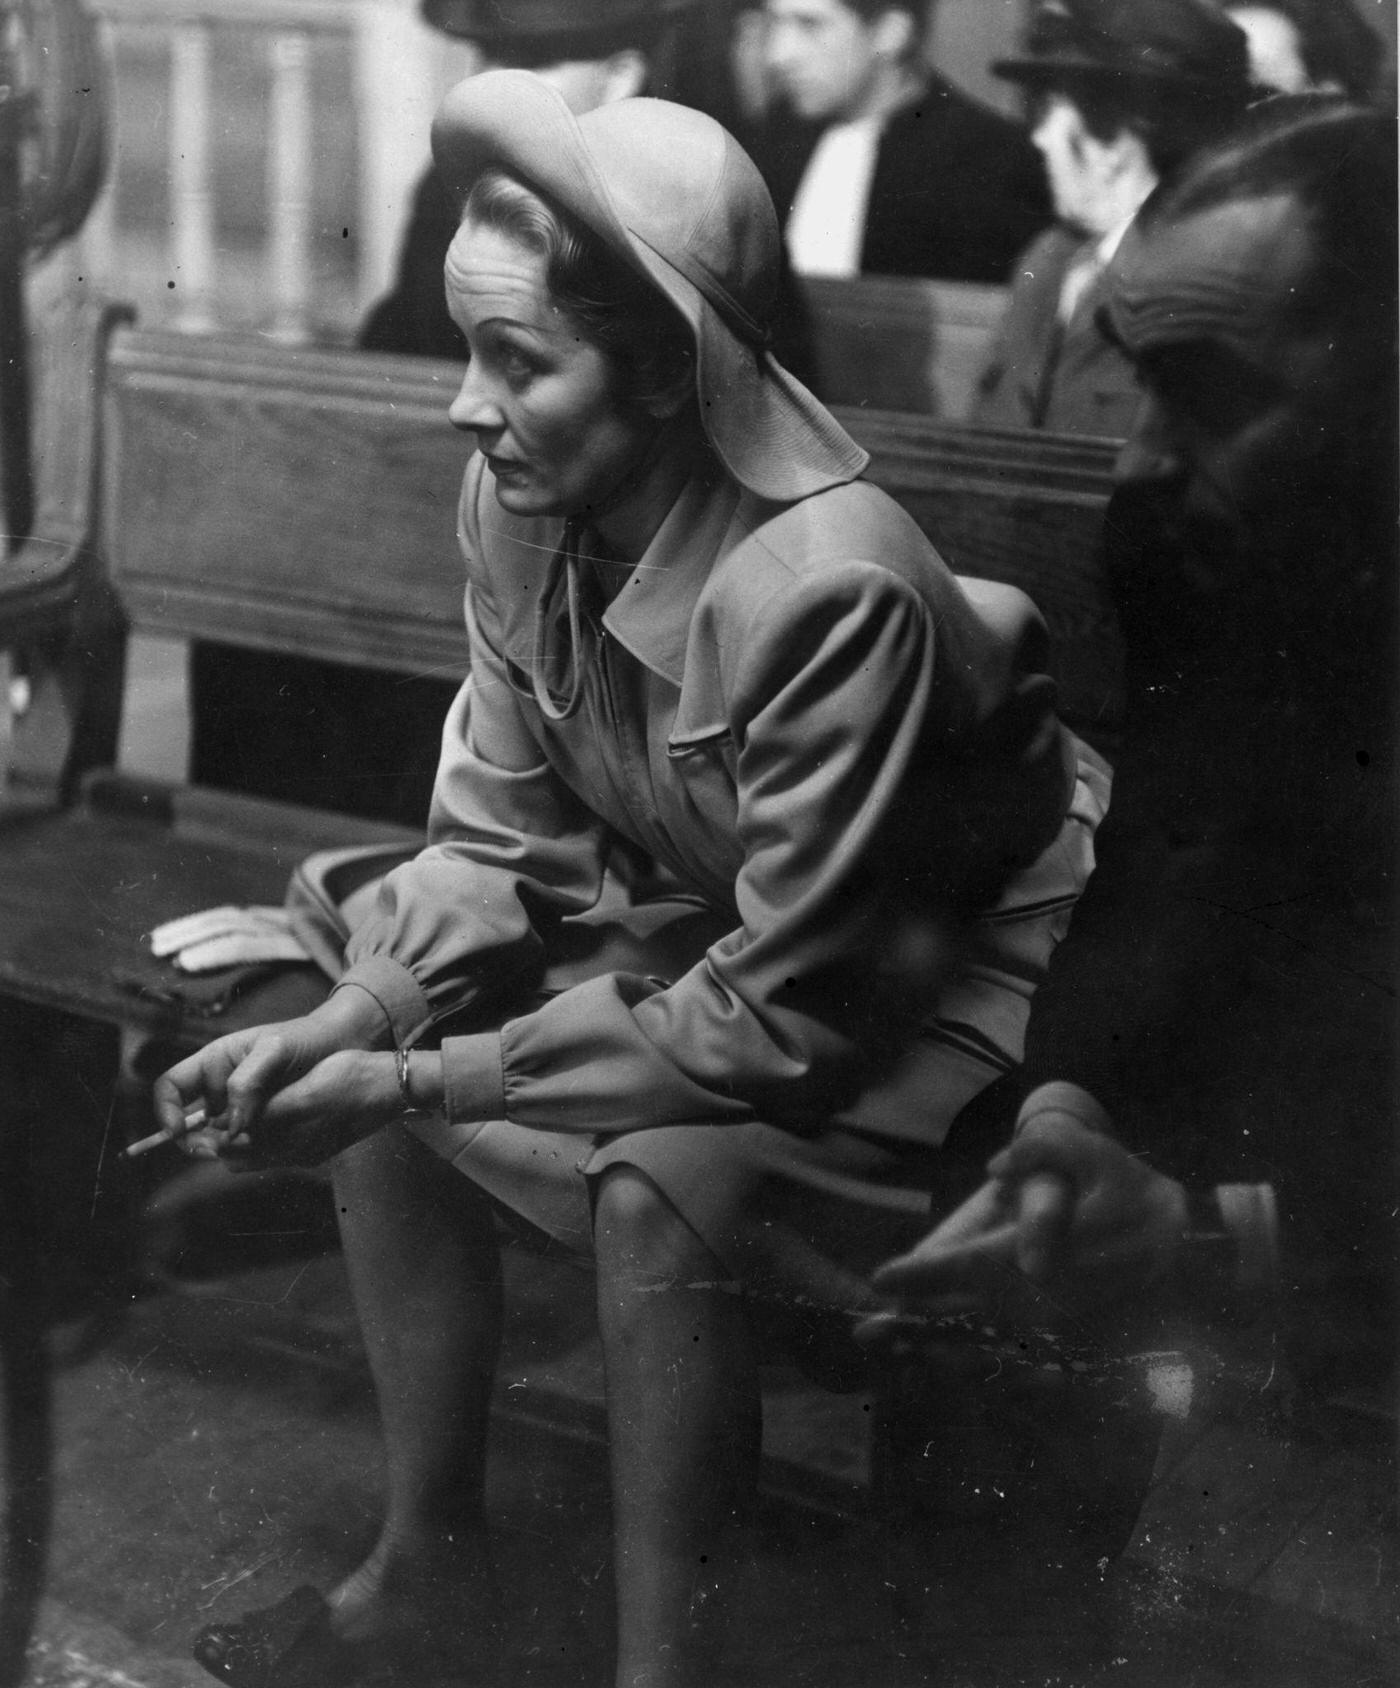 Marlene Dietrich takes a cigarette break during the filming of 'Martin Roumagnac' in 1944.